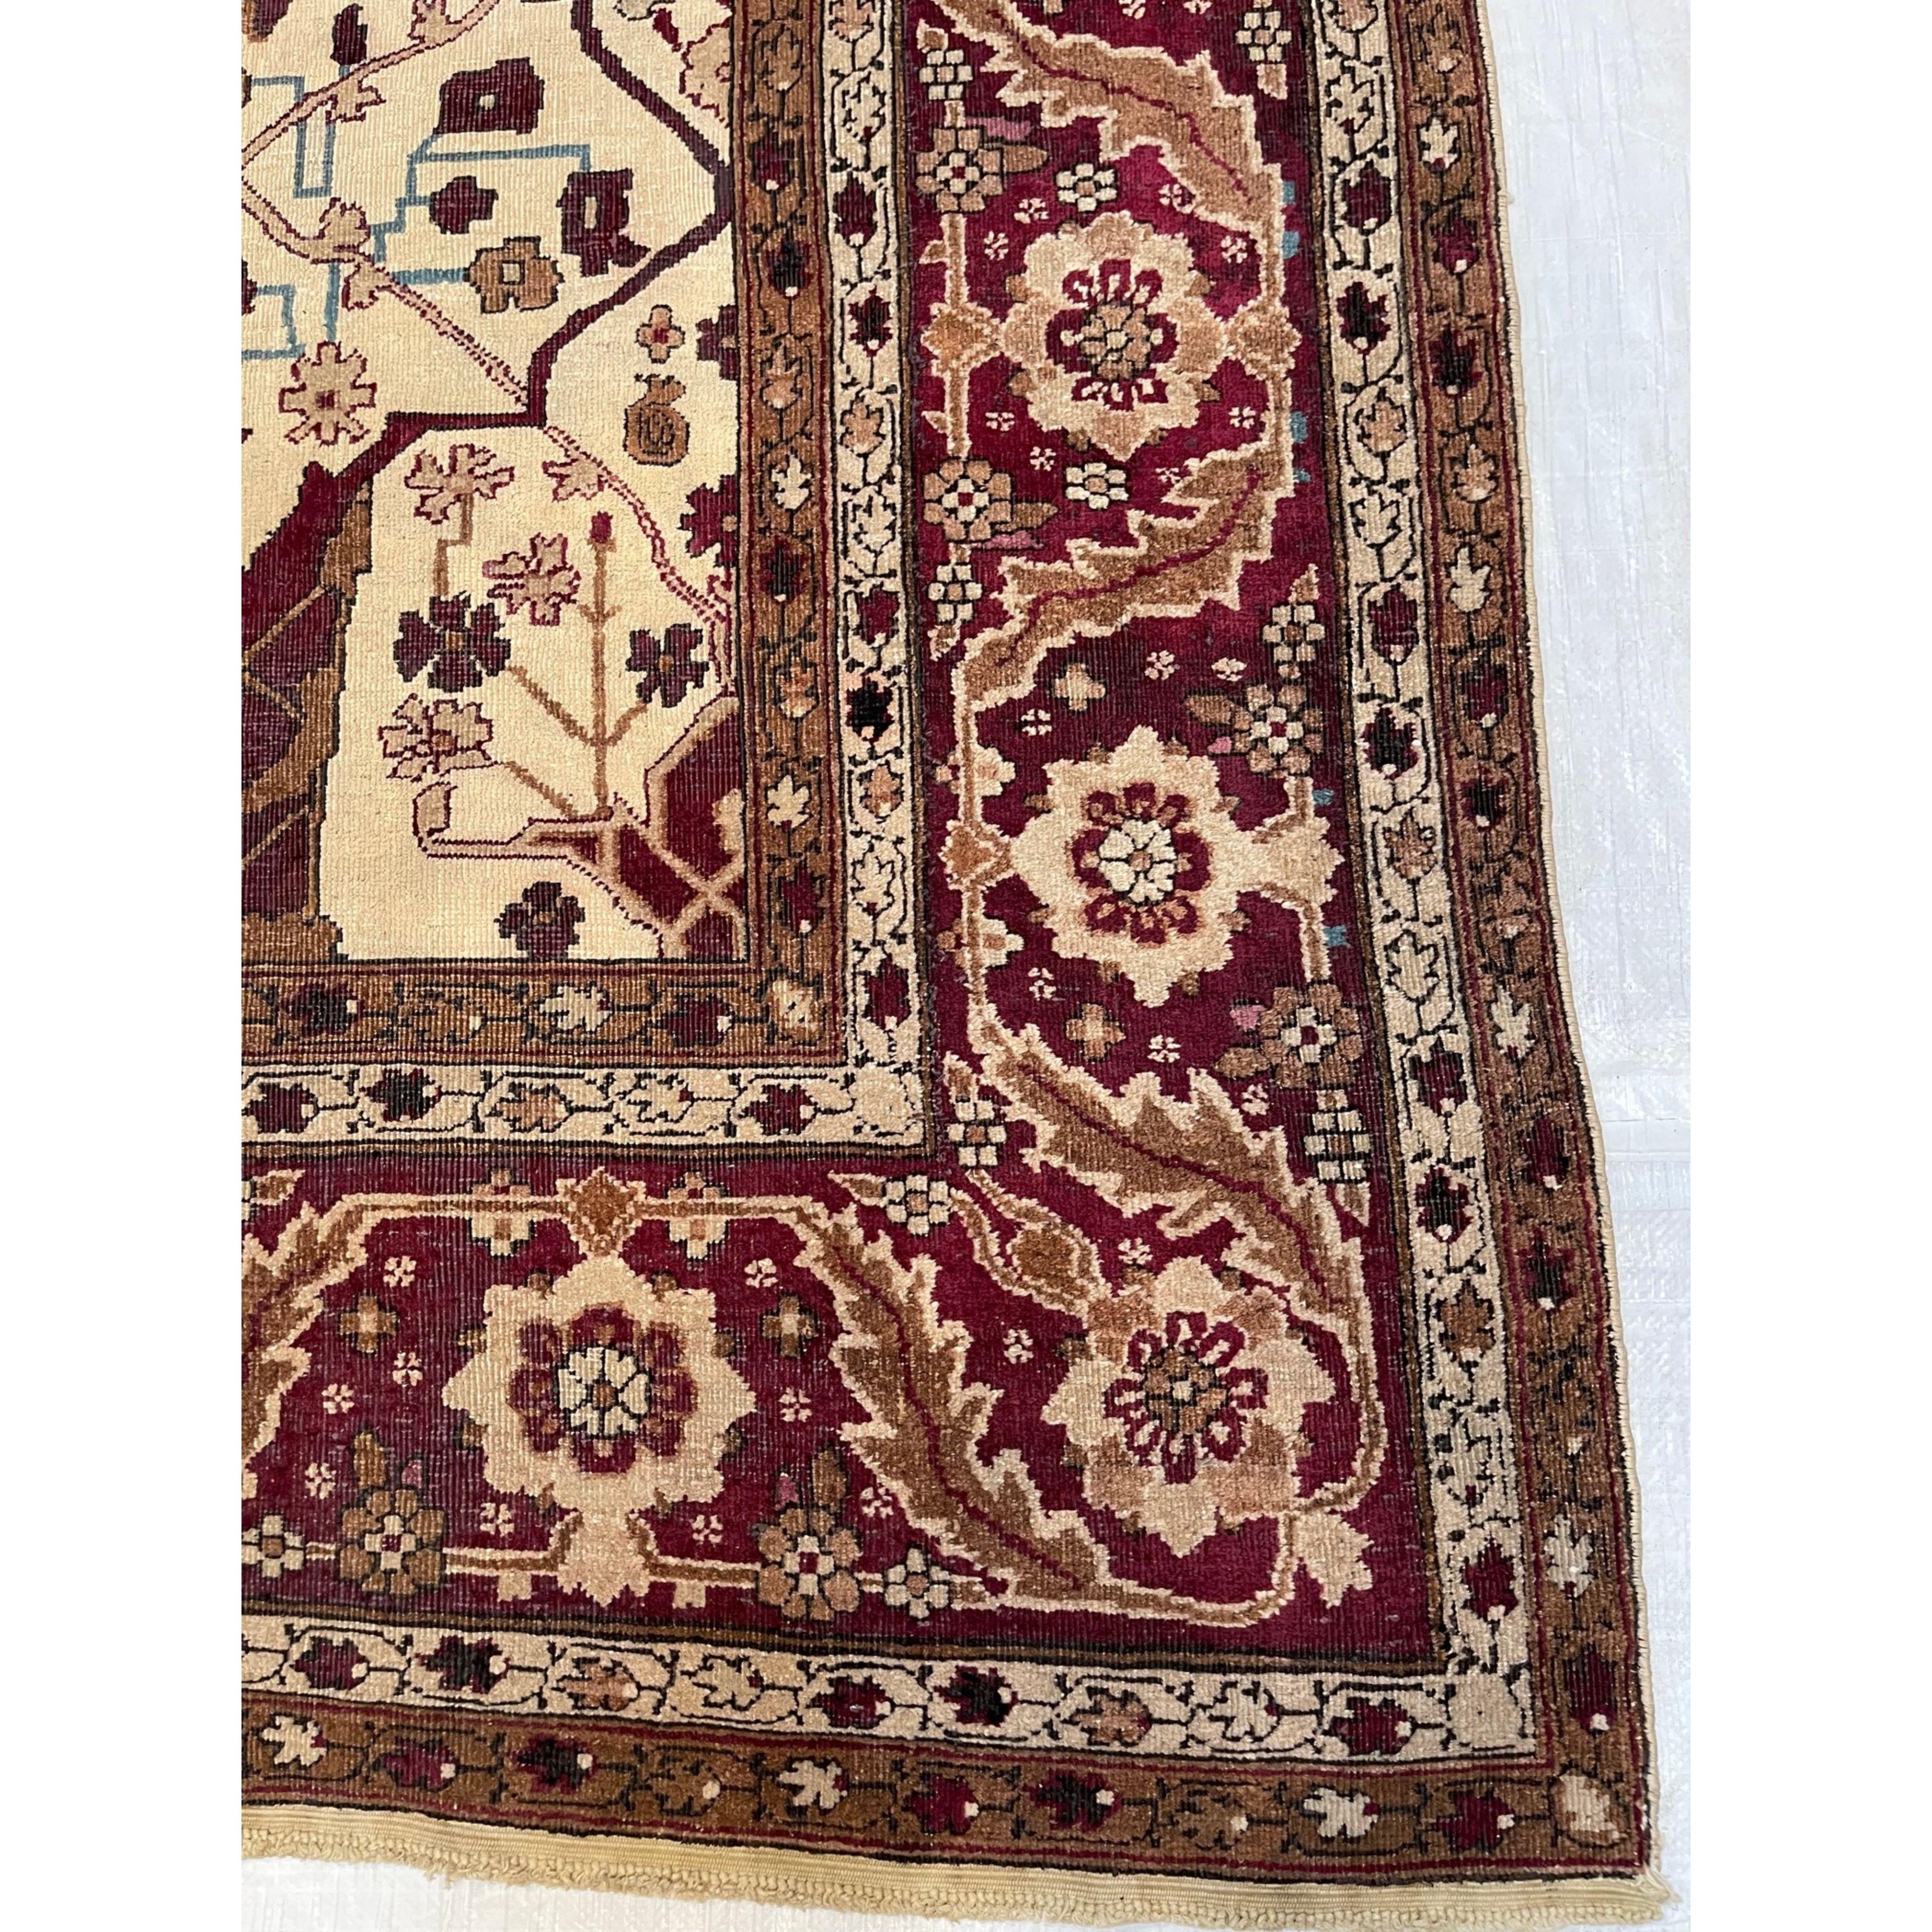 Antique Amritsar Rugs – The spectacular rugs of Amritsar capture the exotic style of India while incorporating a subtle colonial influence. This convergence of eastern and western styles results in an exceptionally alluring appearance that has been